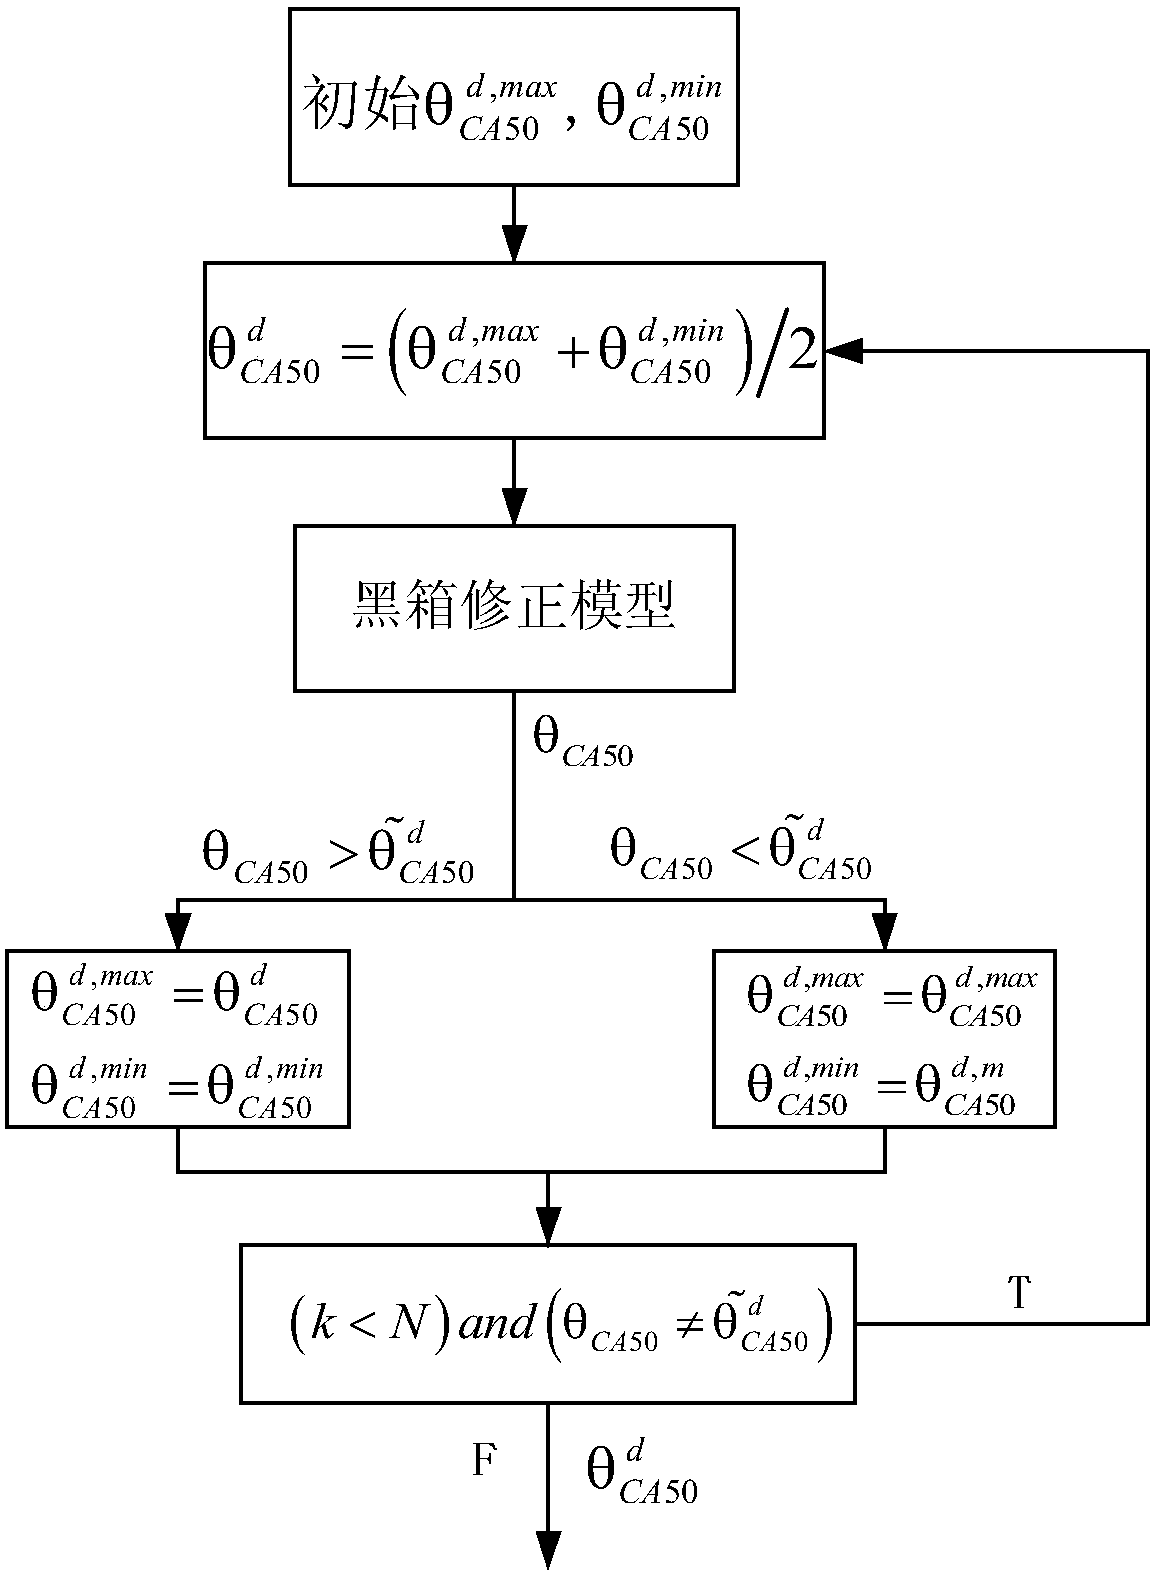 Combustion Timing Control Method of HCCI Engine Based on Linear Model and Sliding Mode Controller